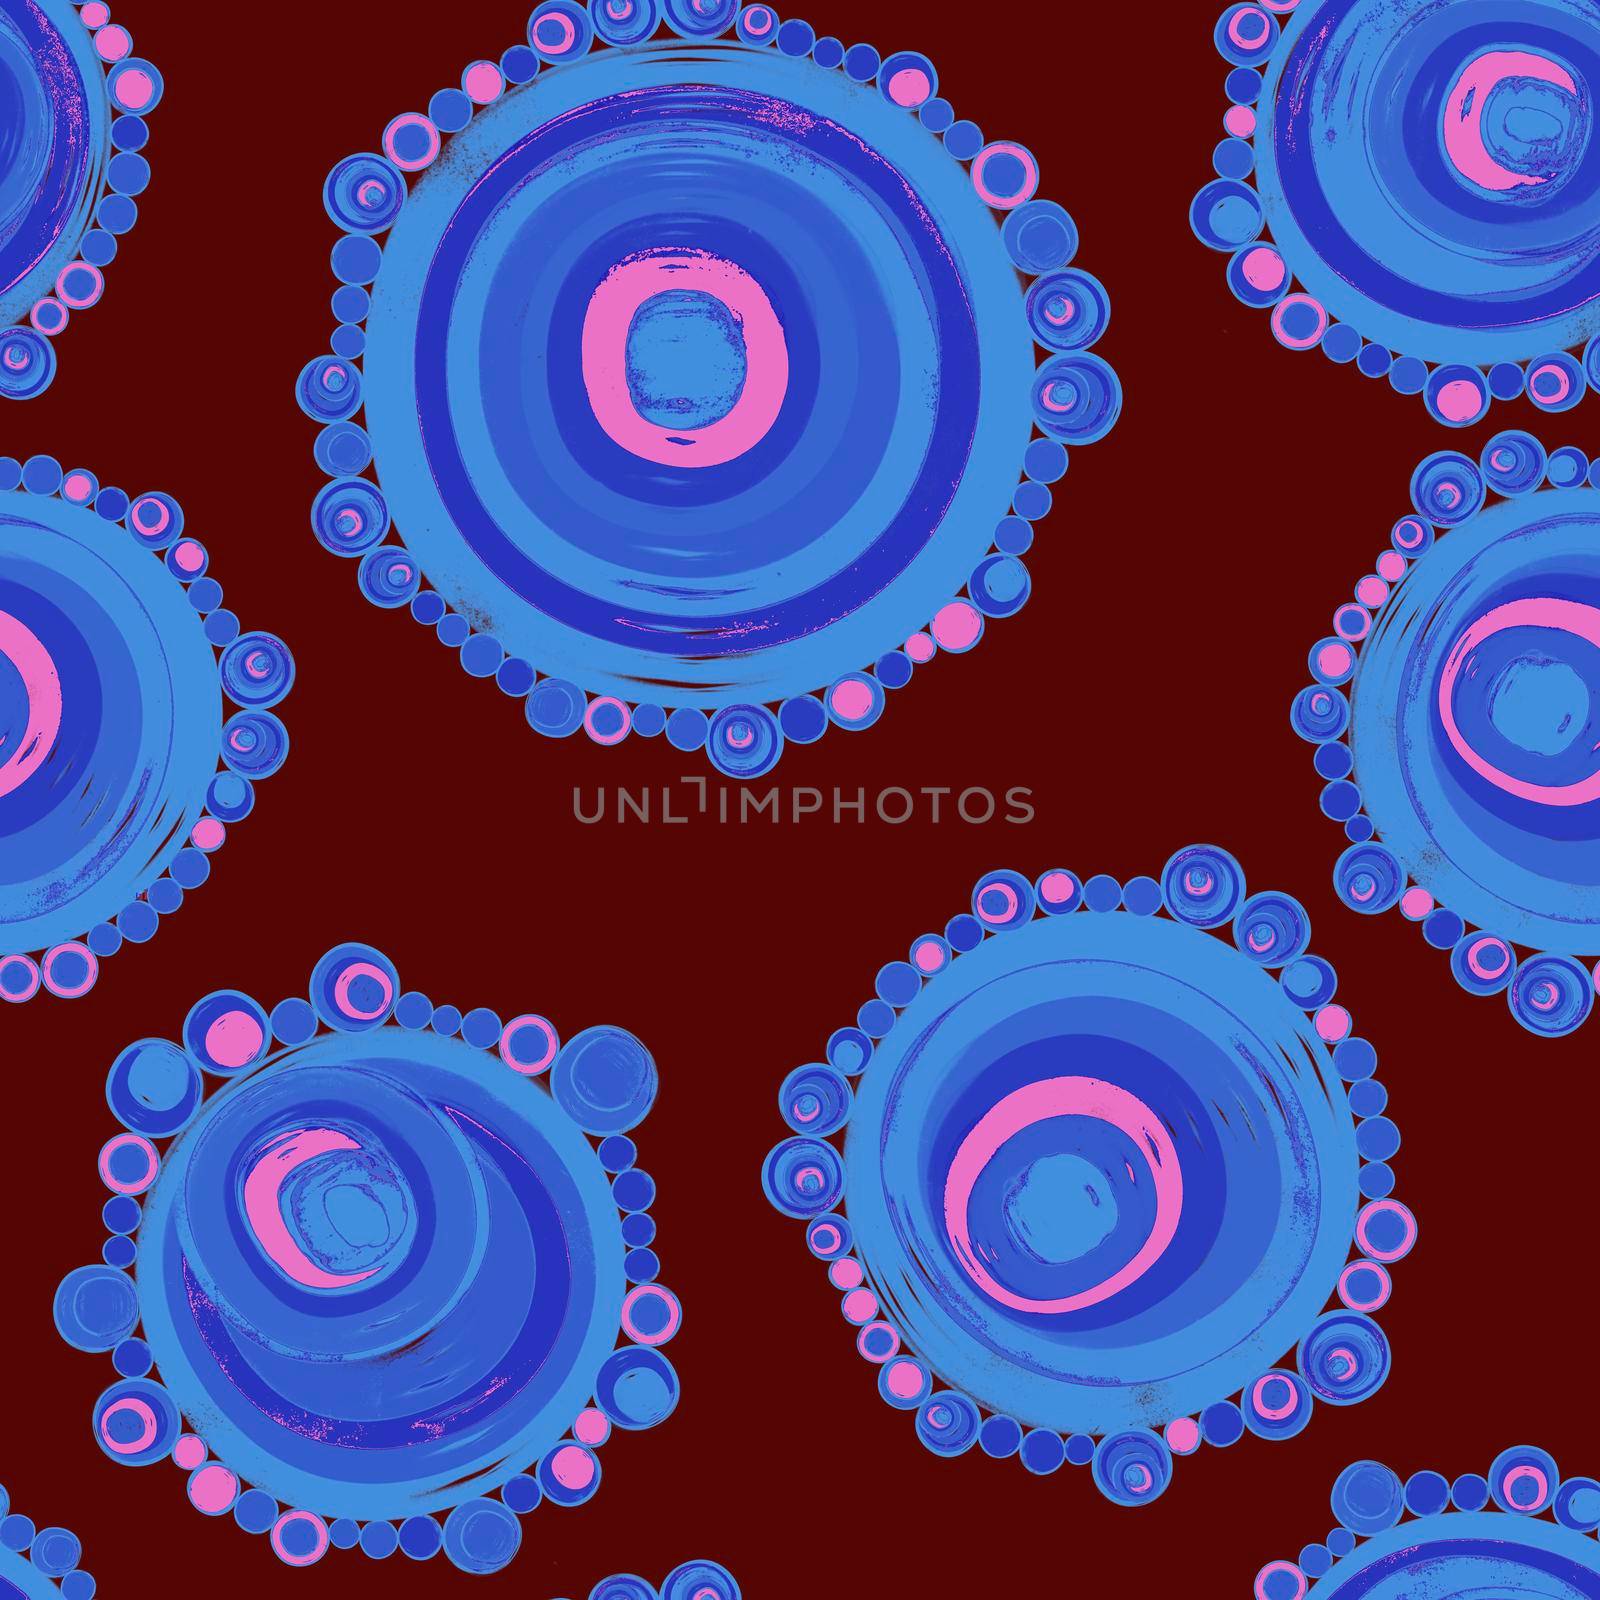 Geometric seamless pattern,texture with perfectly contacting nested circles with different size colors.Repeating pattern with circles filled with dots.For textile,wrapping paper,banner.Azure burgundy.